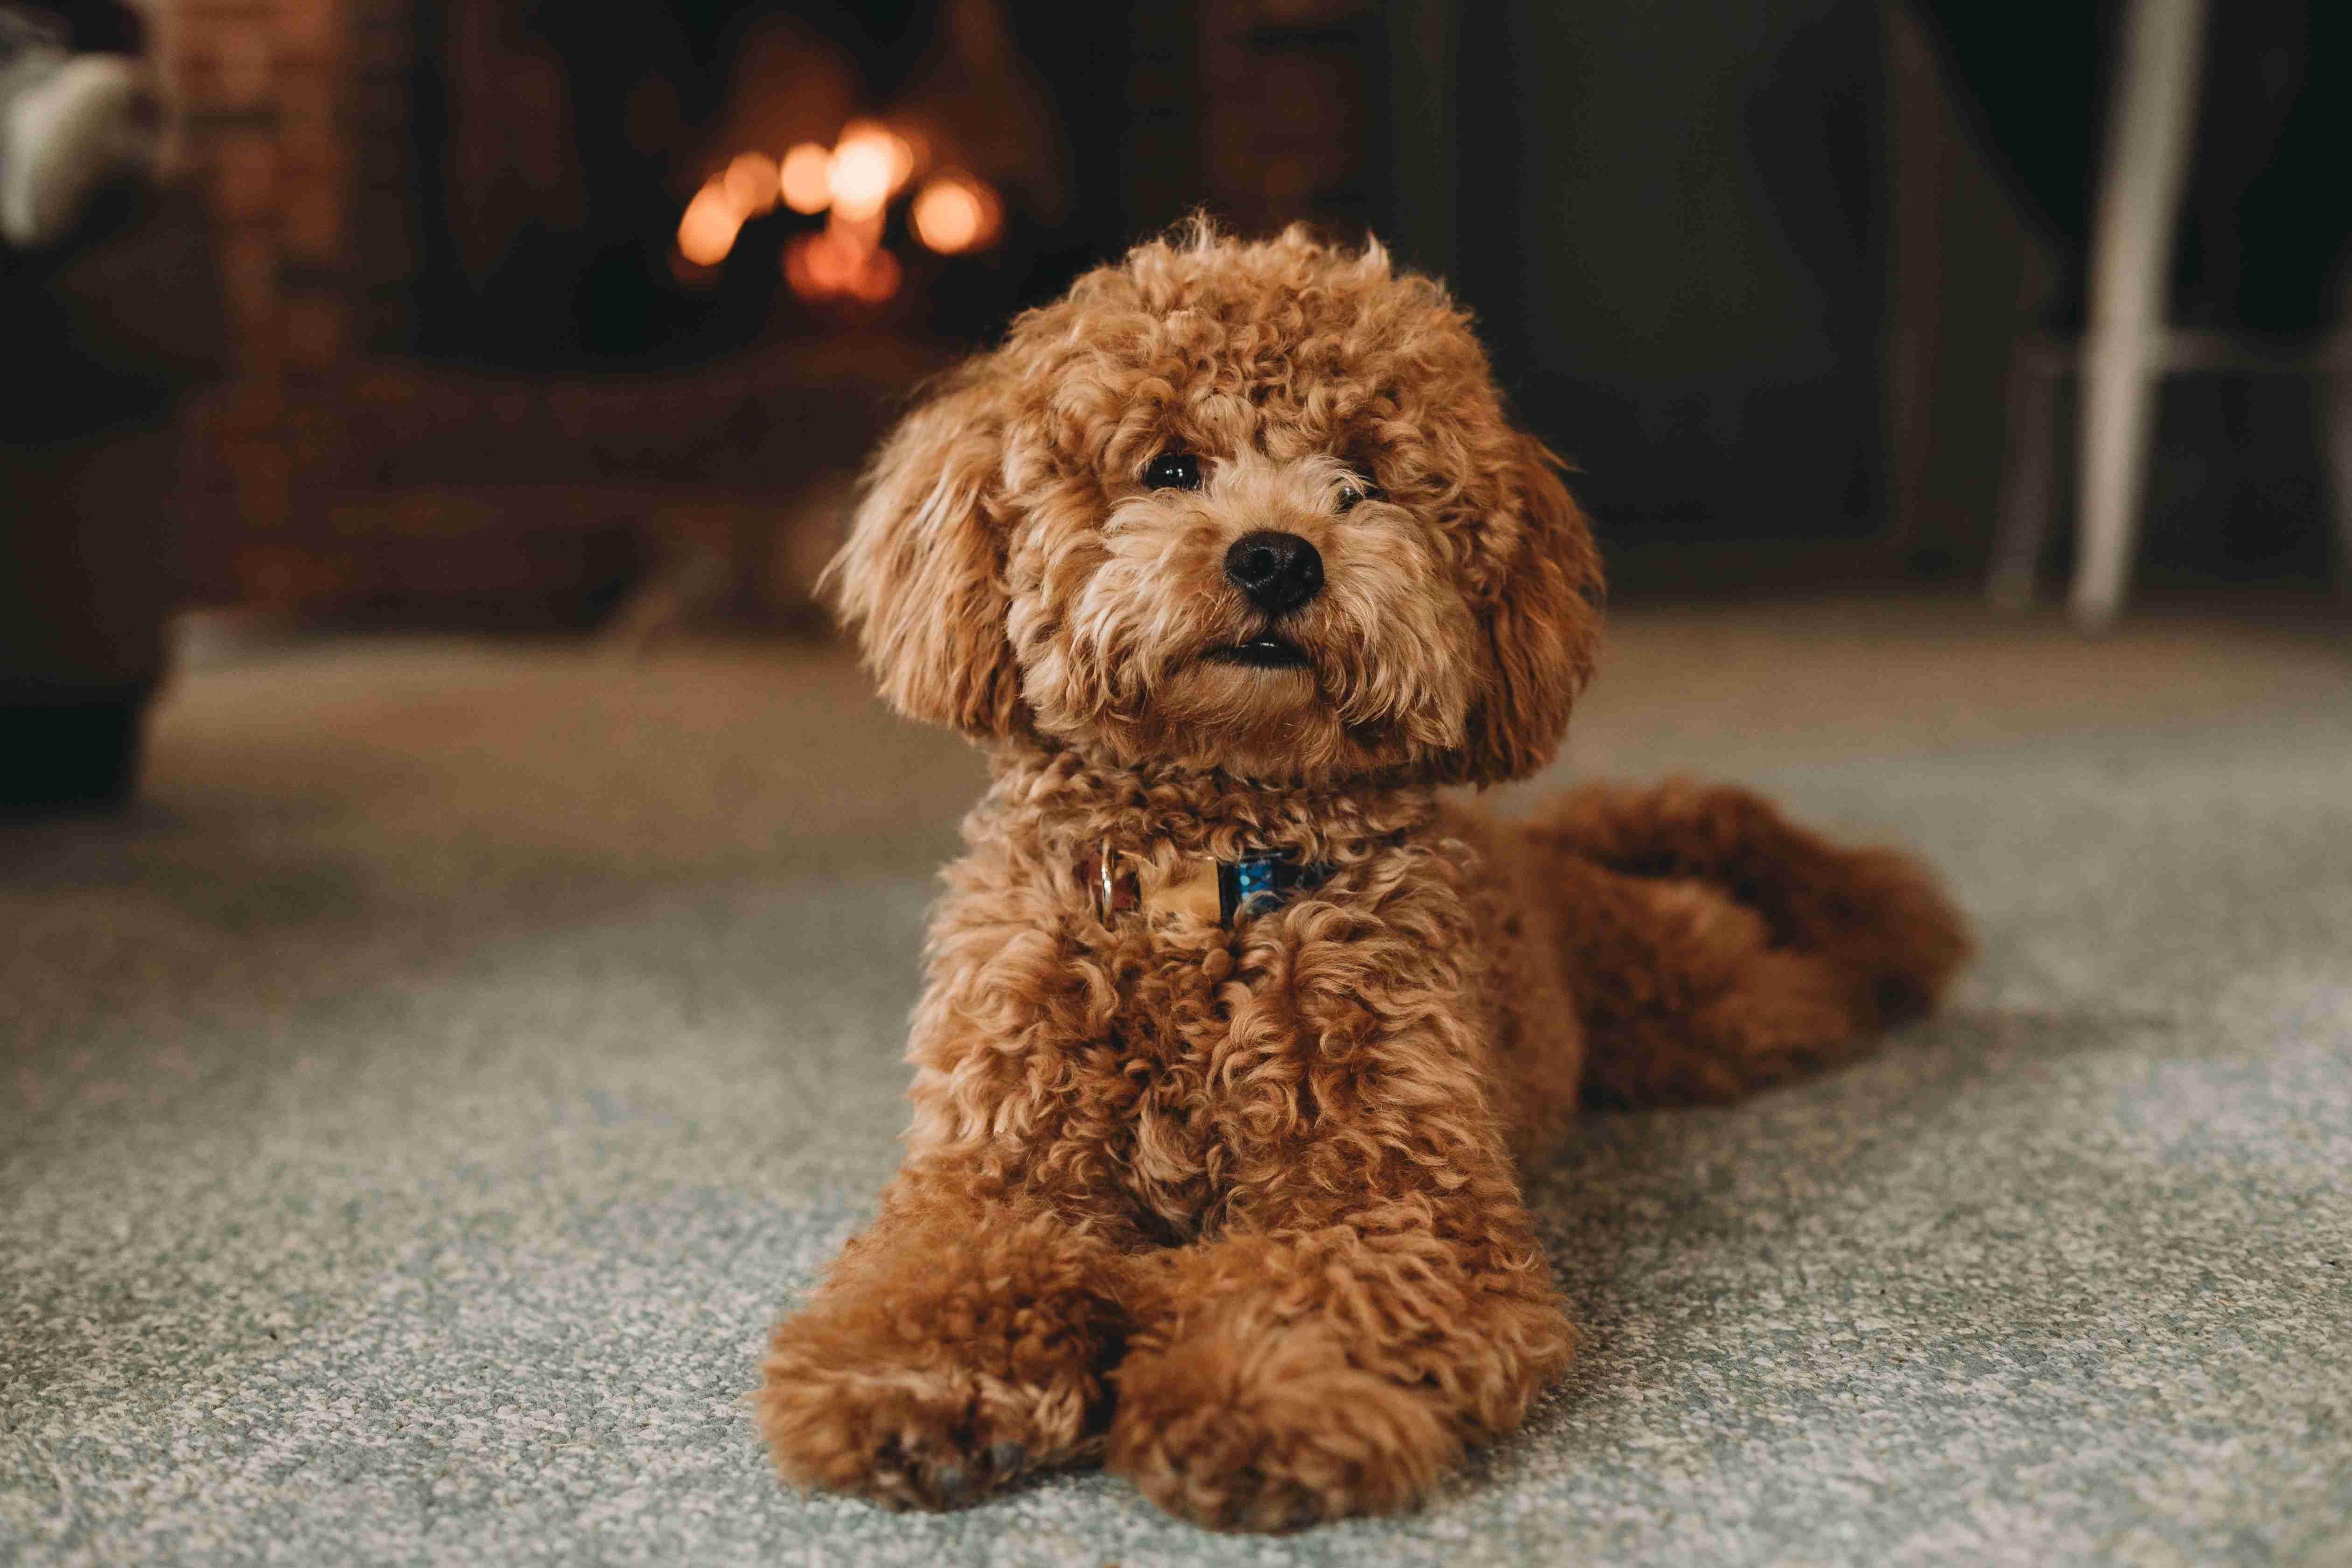 What supplies did you purchase for your Poodle puppy before bringing them home?